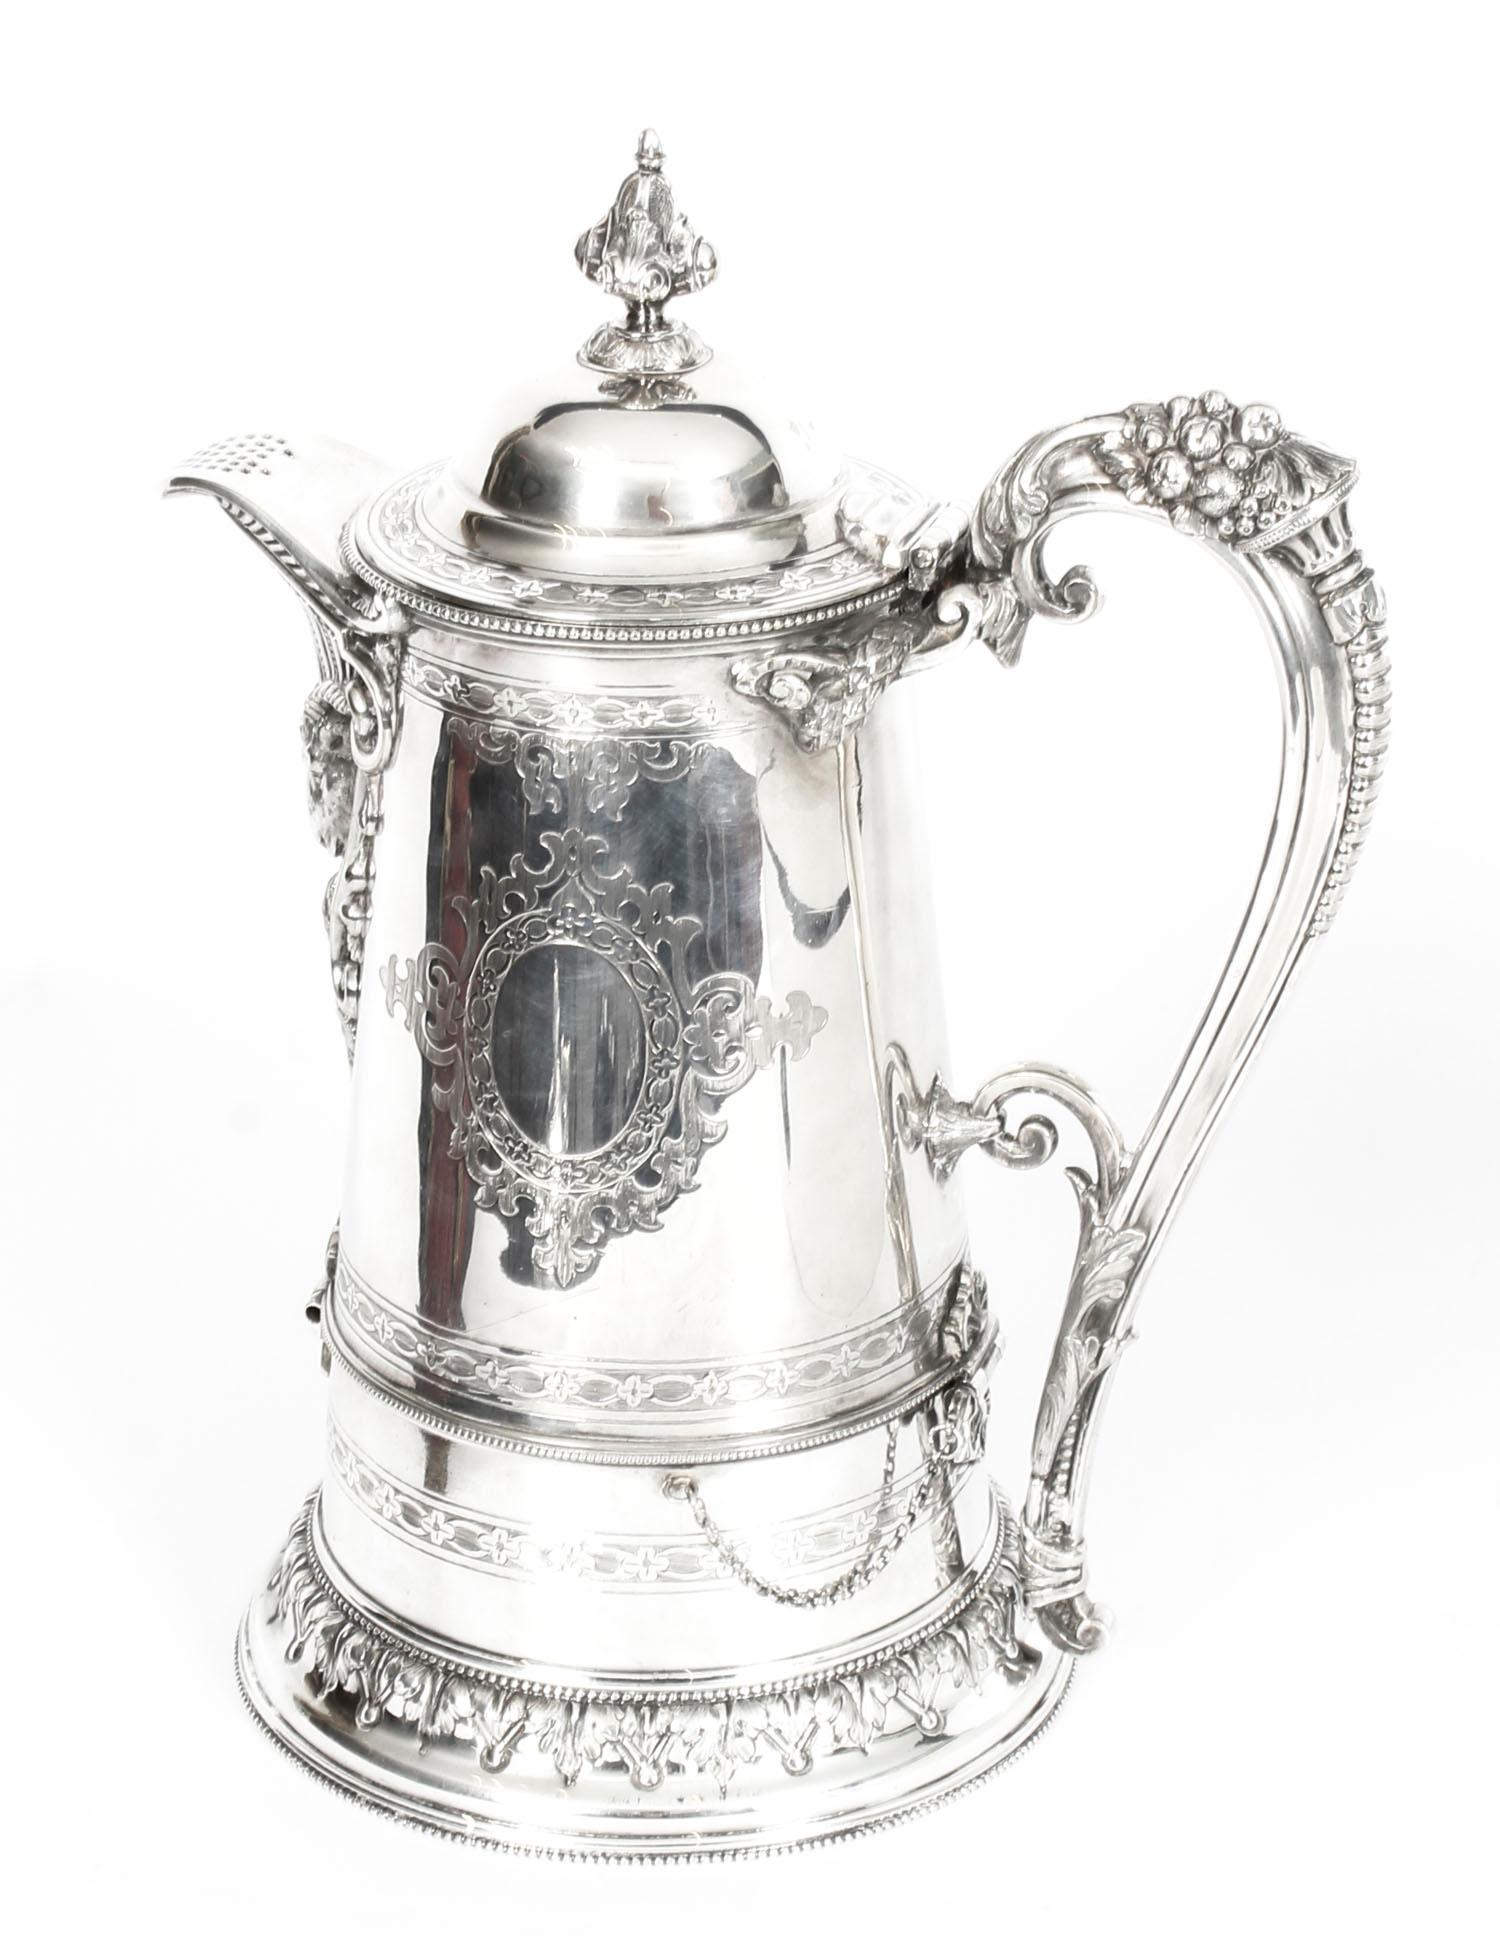 This is a wonderful antique English Victorian silver plated flagon by John Round of Tudor Street Sheffield, England, circa 1875 in date.

It has superb embossed and engraved decoration, with a decorative ram's head spout, a handle with grape